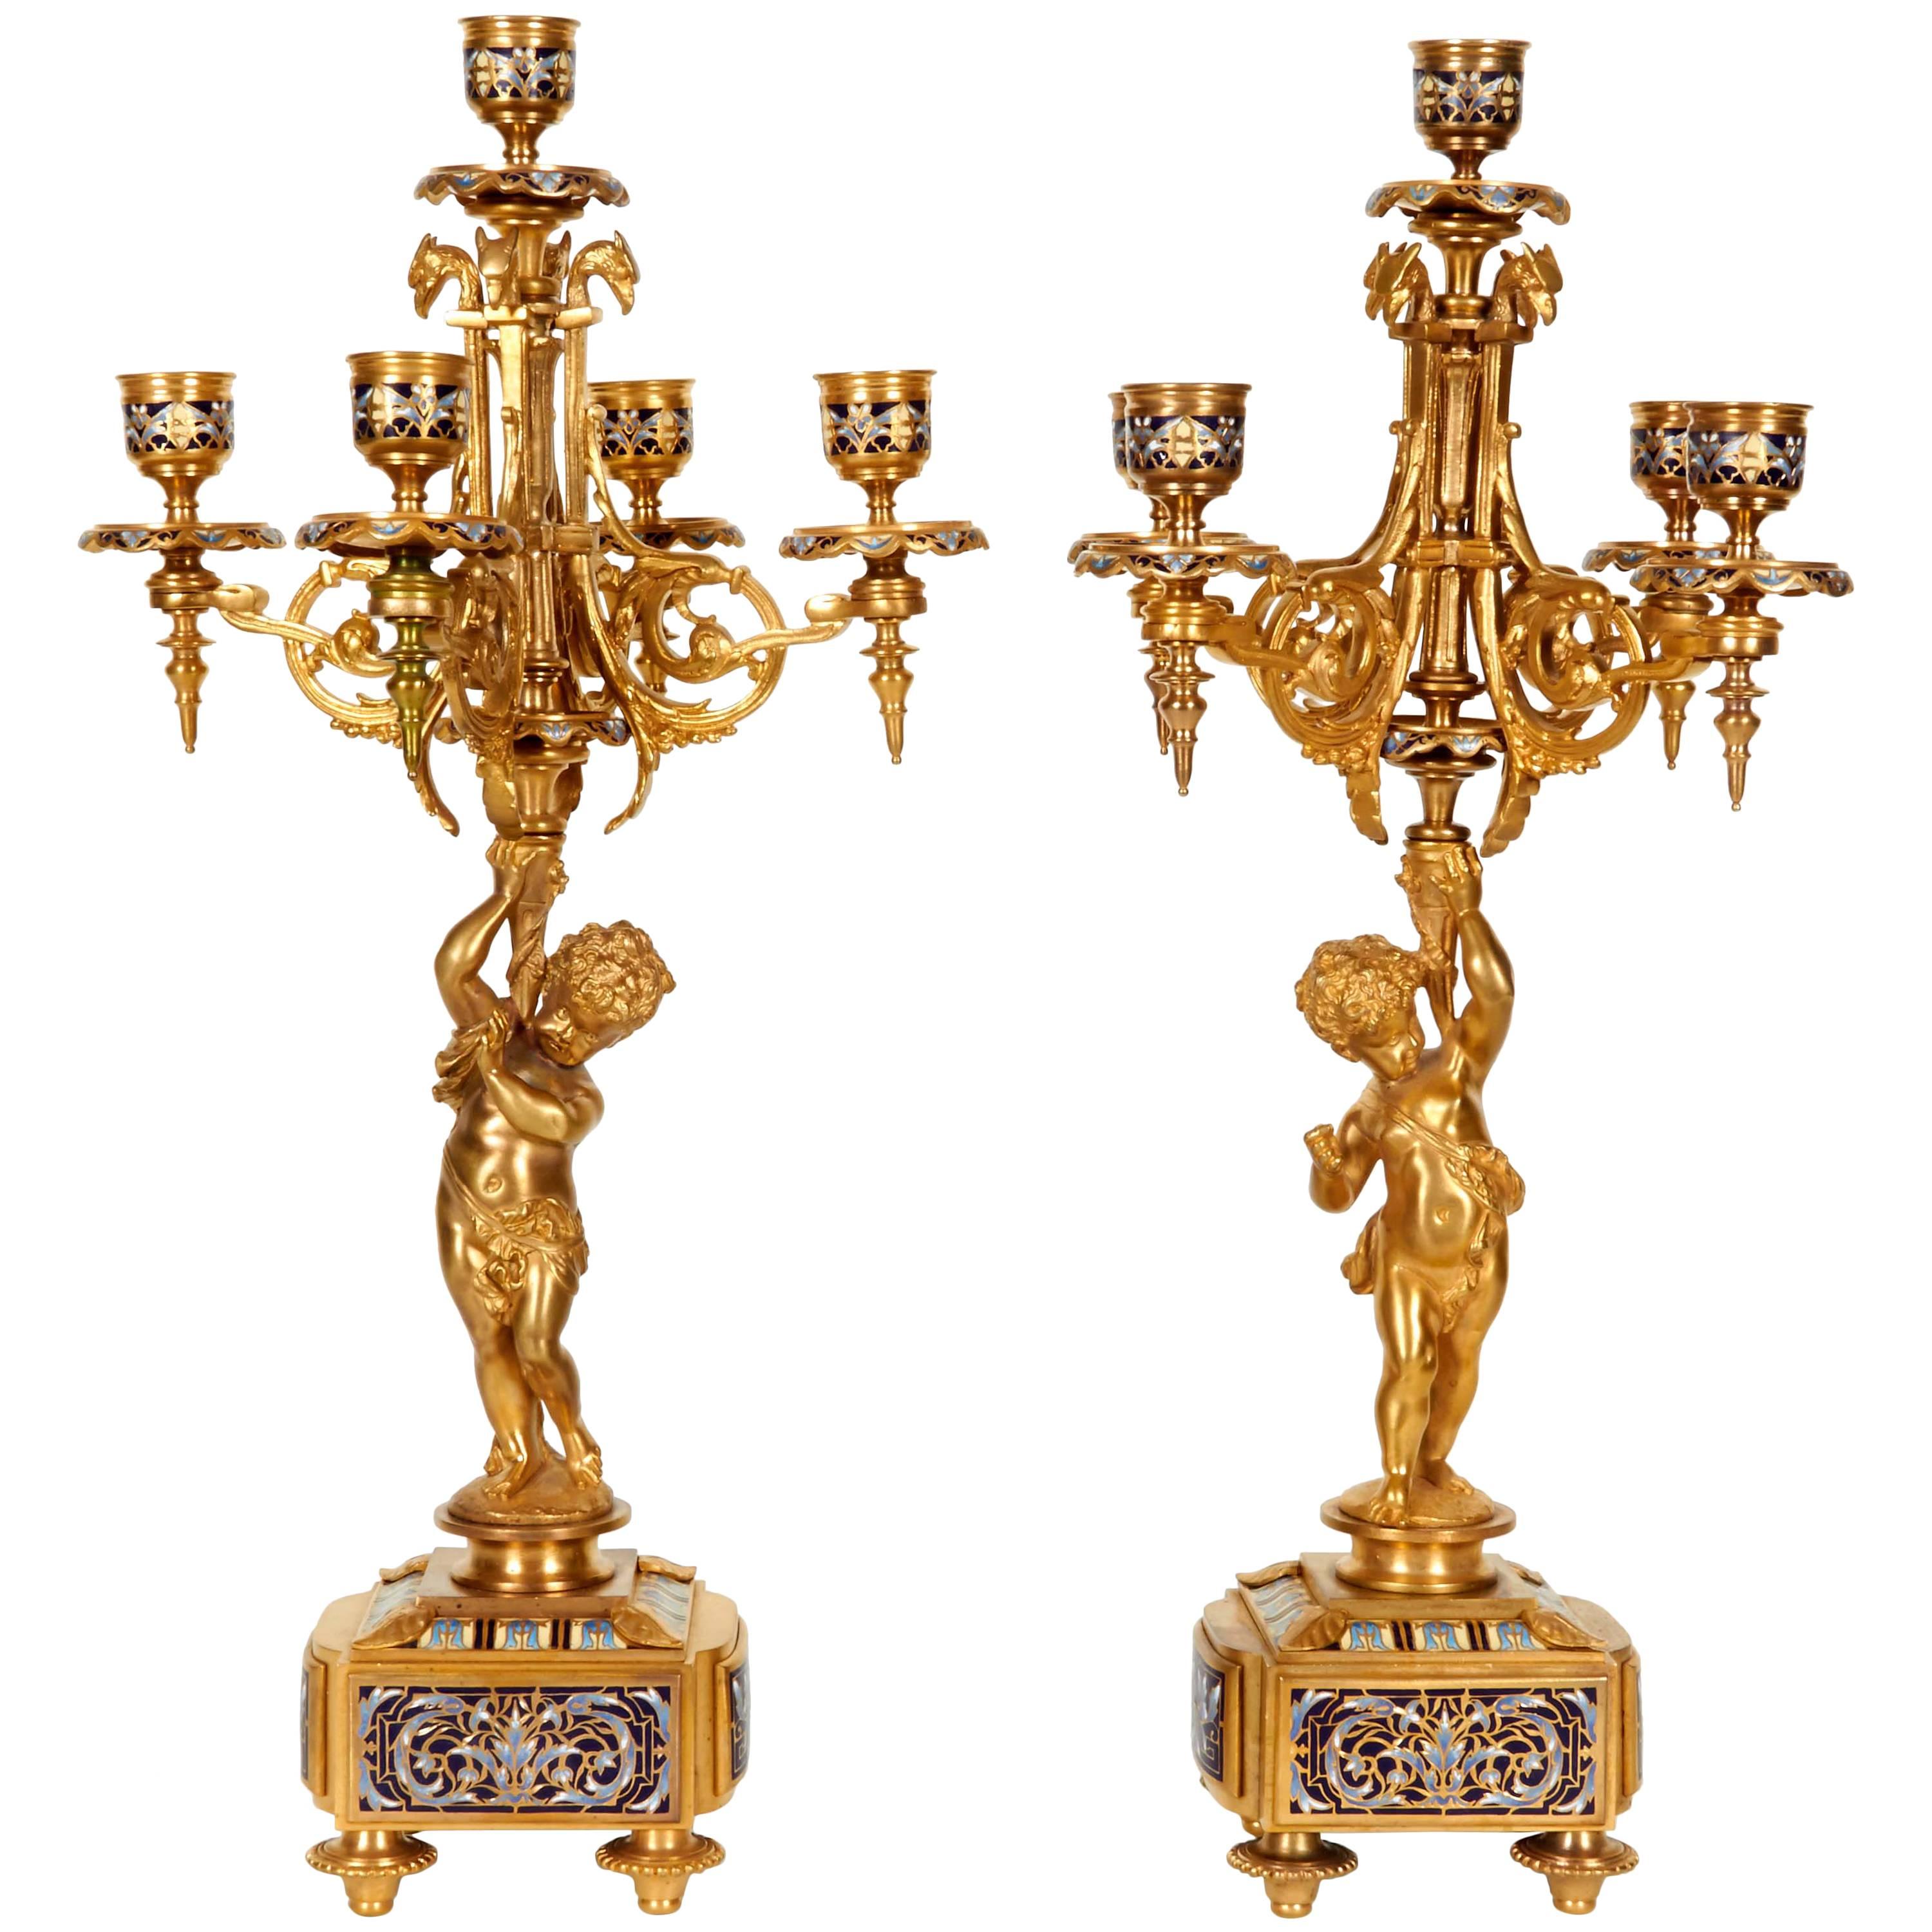 Pair of French Ormolu and Champleve Cloisonne Enamel Candelabra